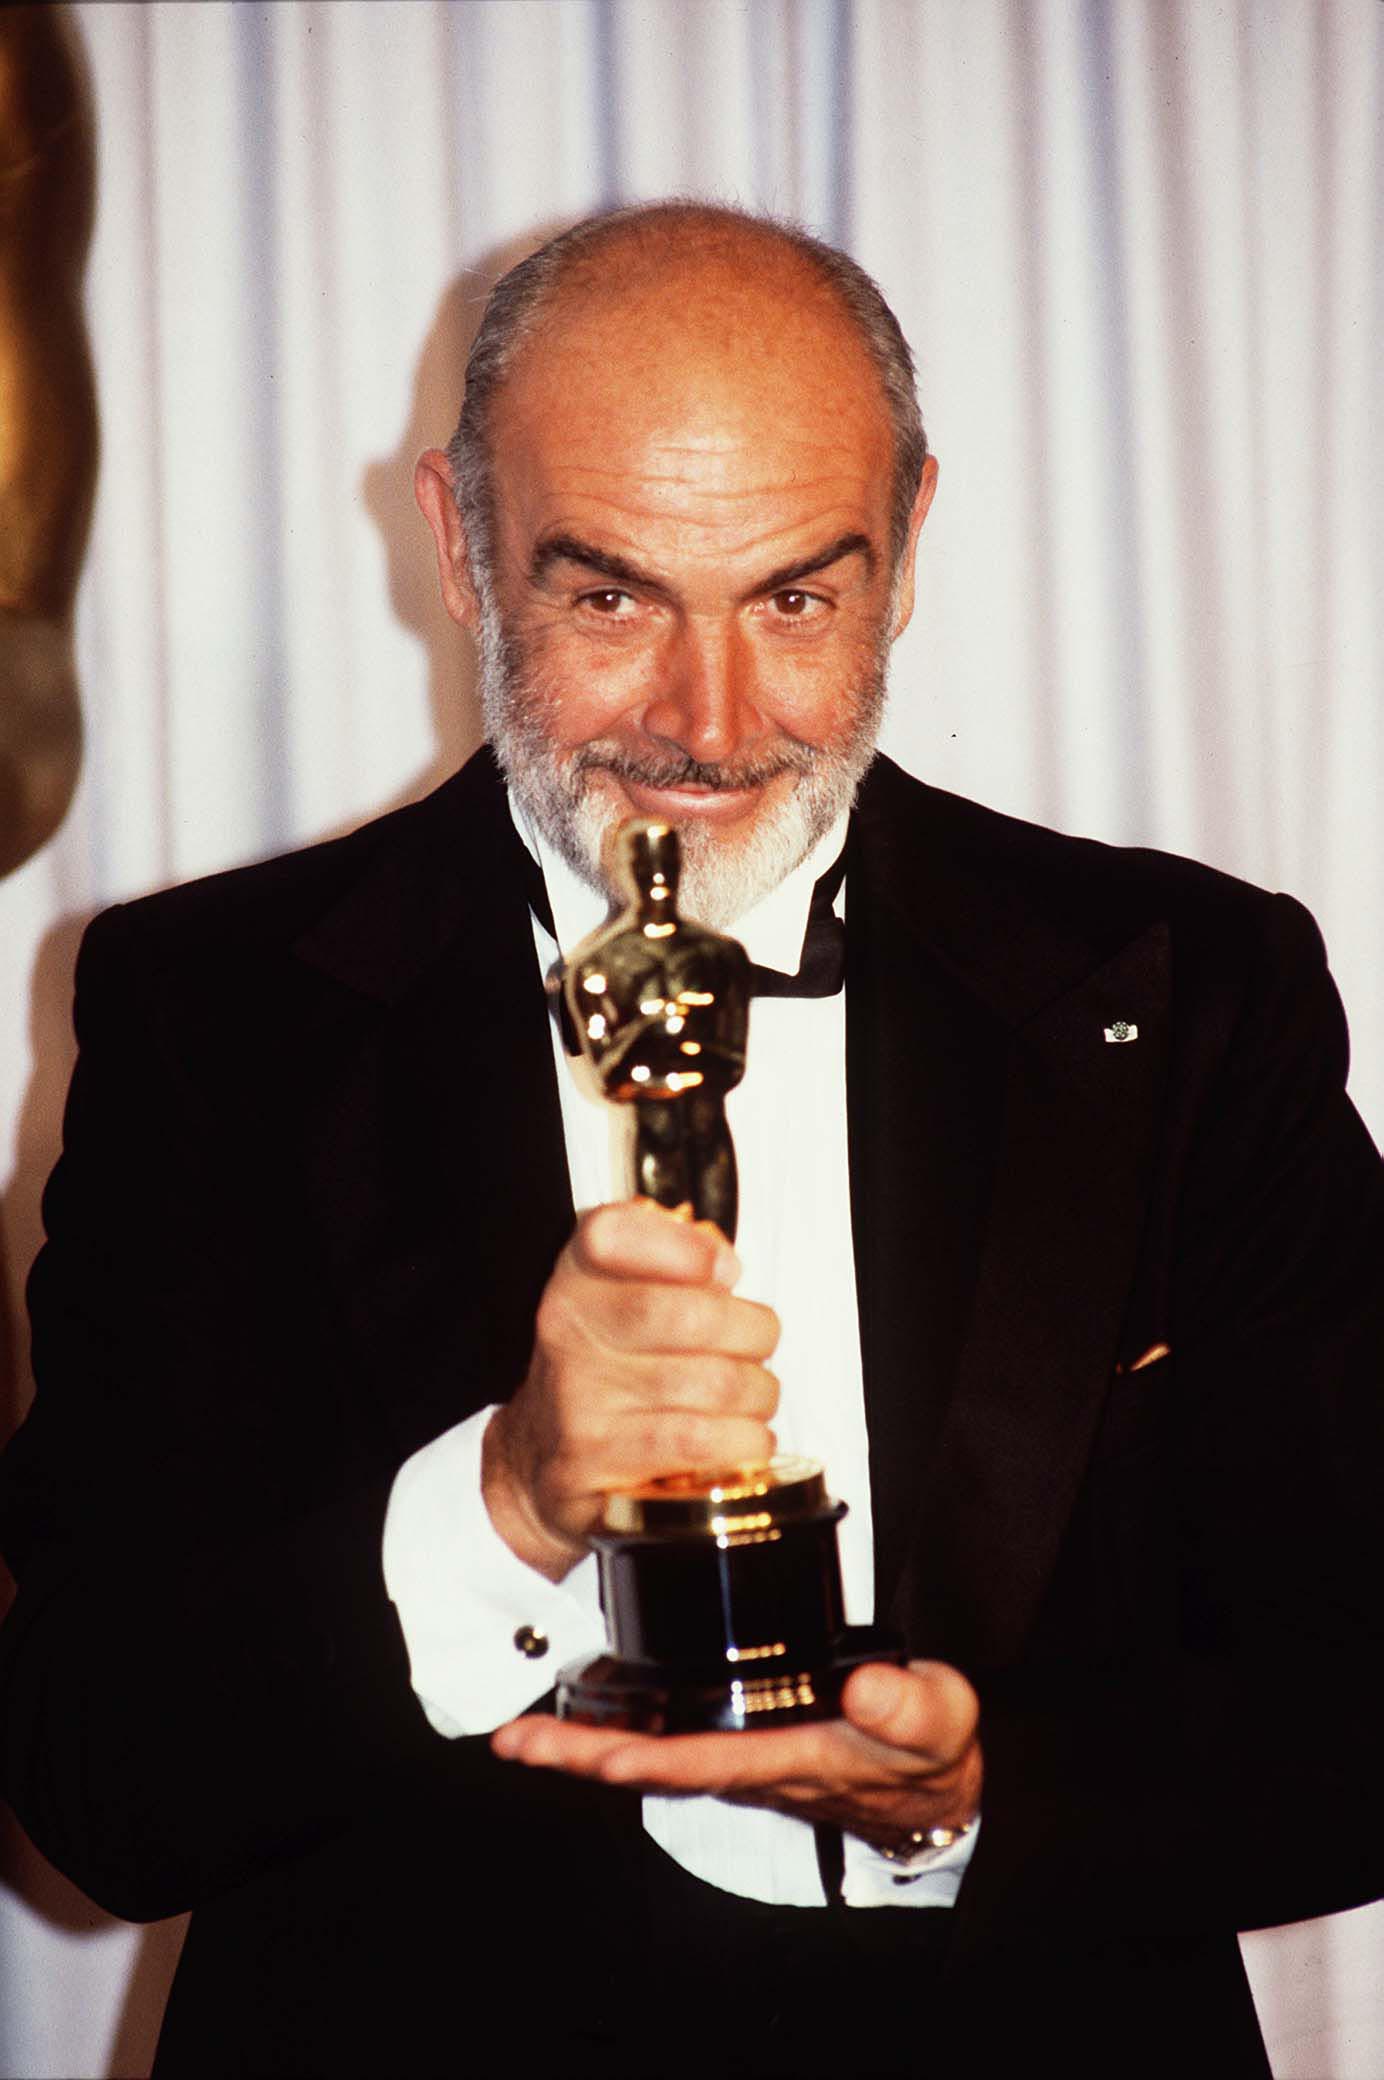 Veteran actor Sean Connery, the first actor to play James Bond, won Best Supporting Actor during the 60th Annual Academy Awards in 1988. | Source: Getty Images